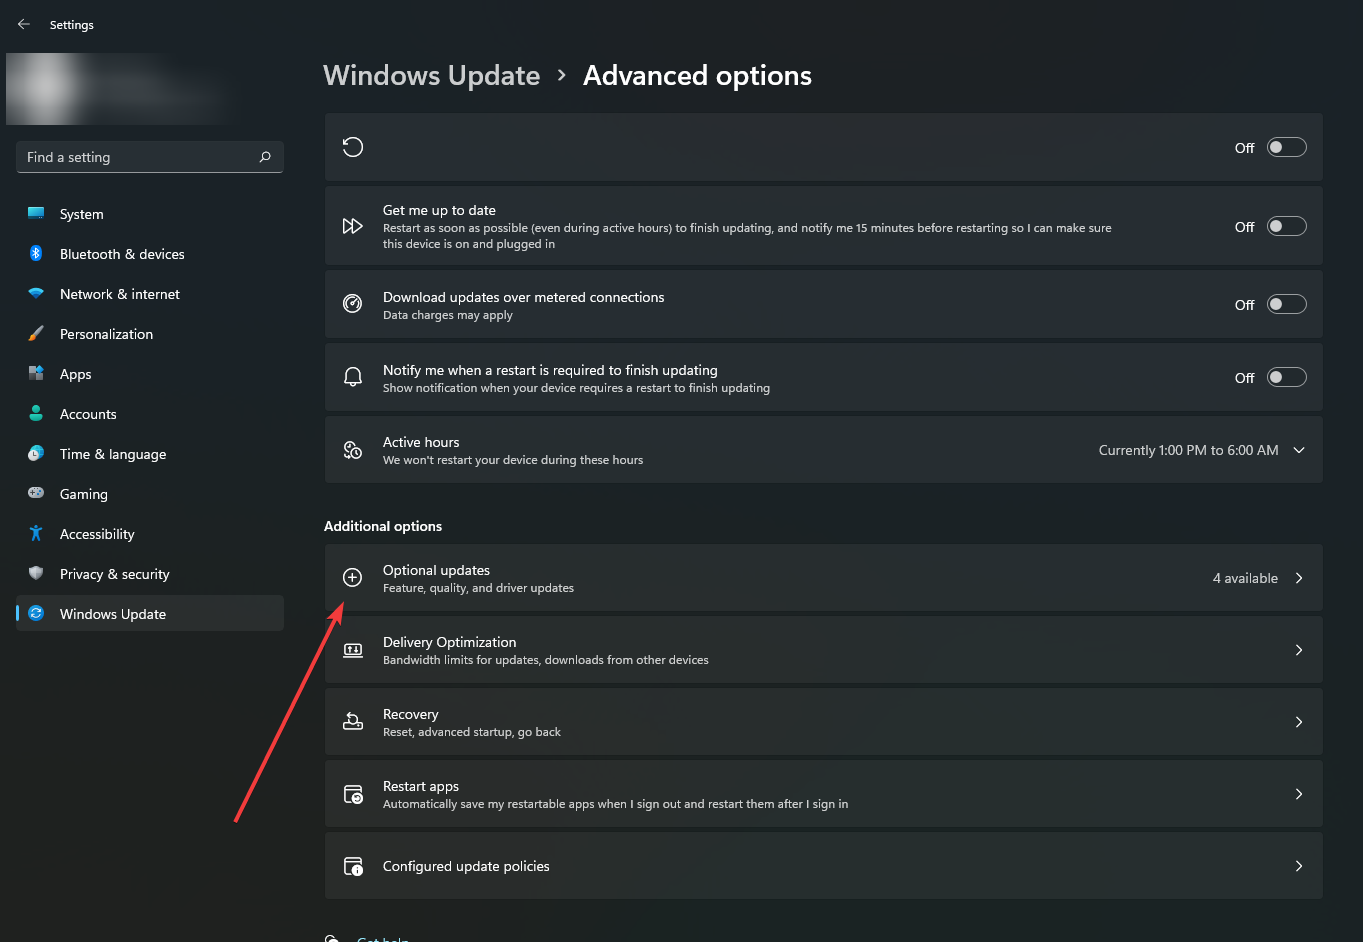 optional updates section in Windwos updates